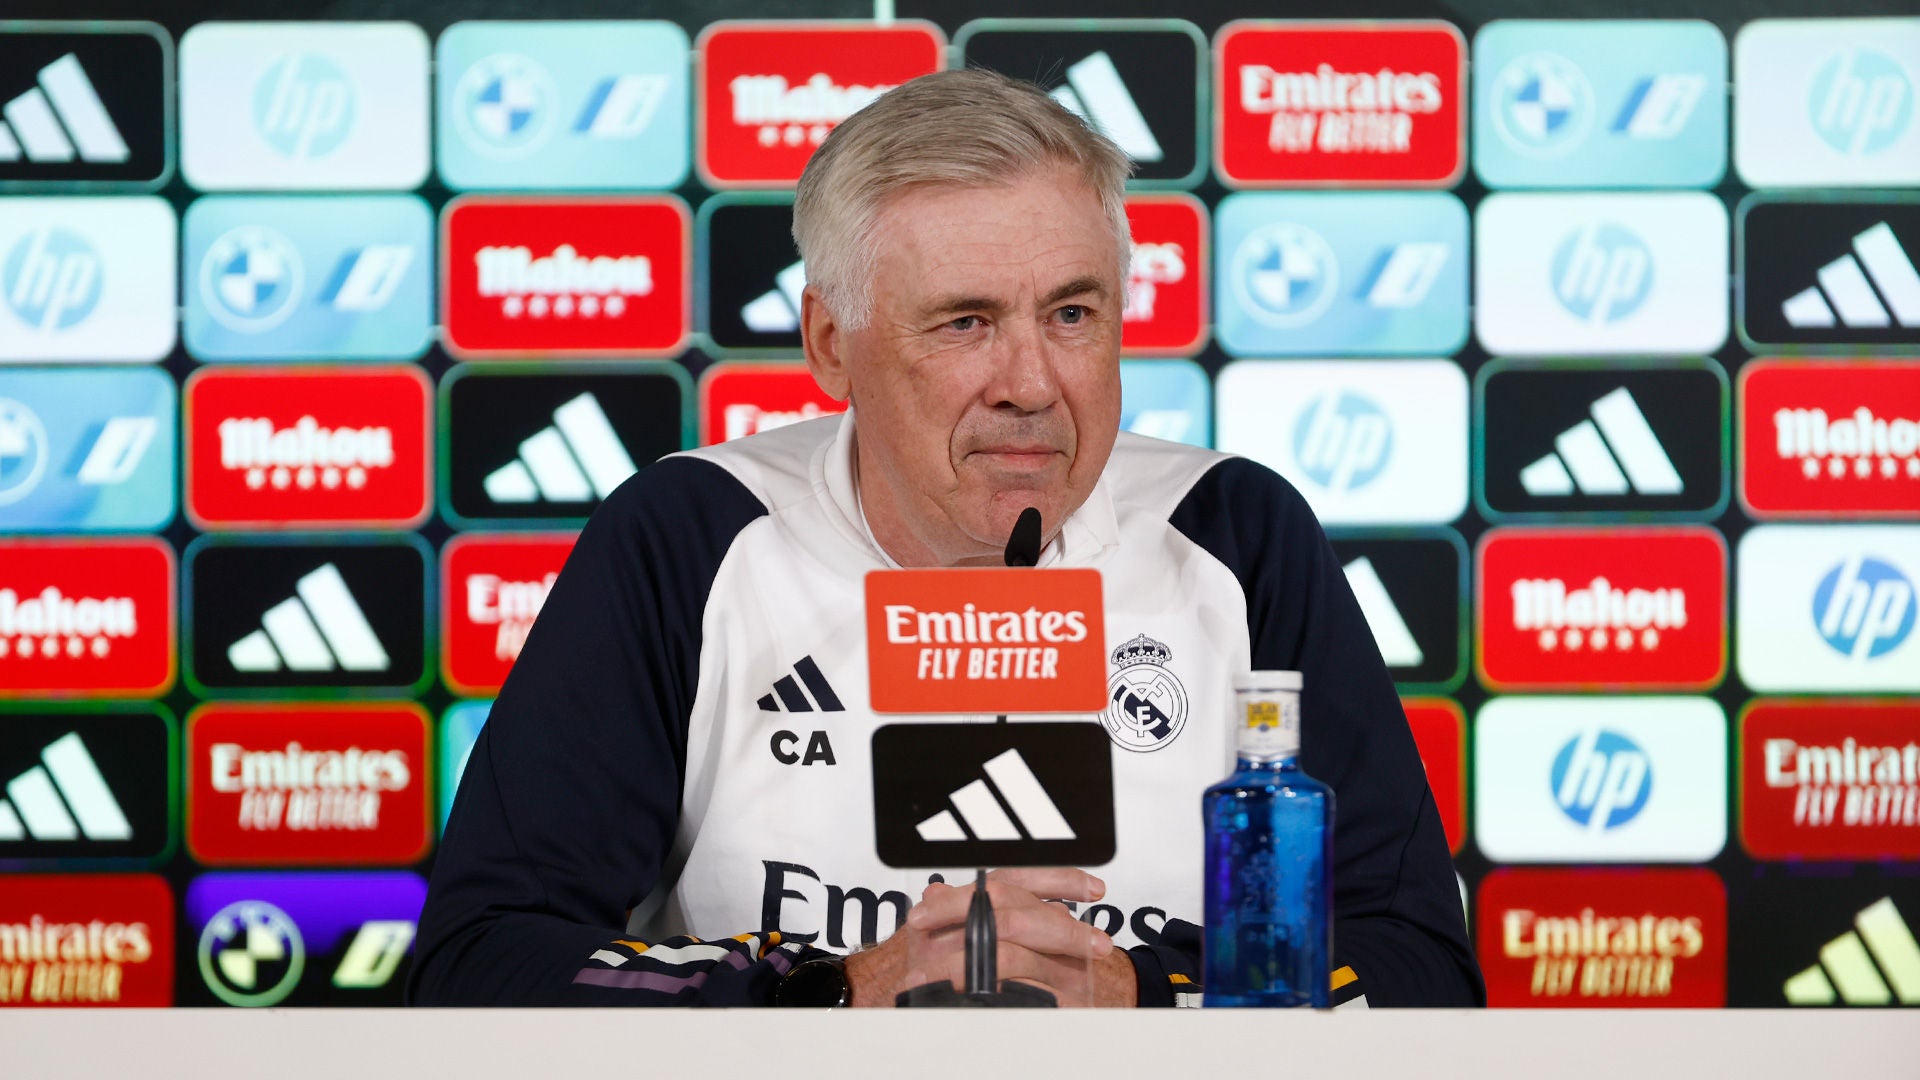 Ancelotti: "We have a great chance to take a big step towards the LaLiga title"